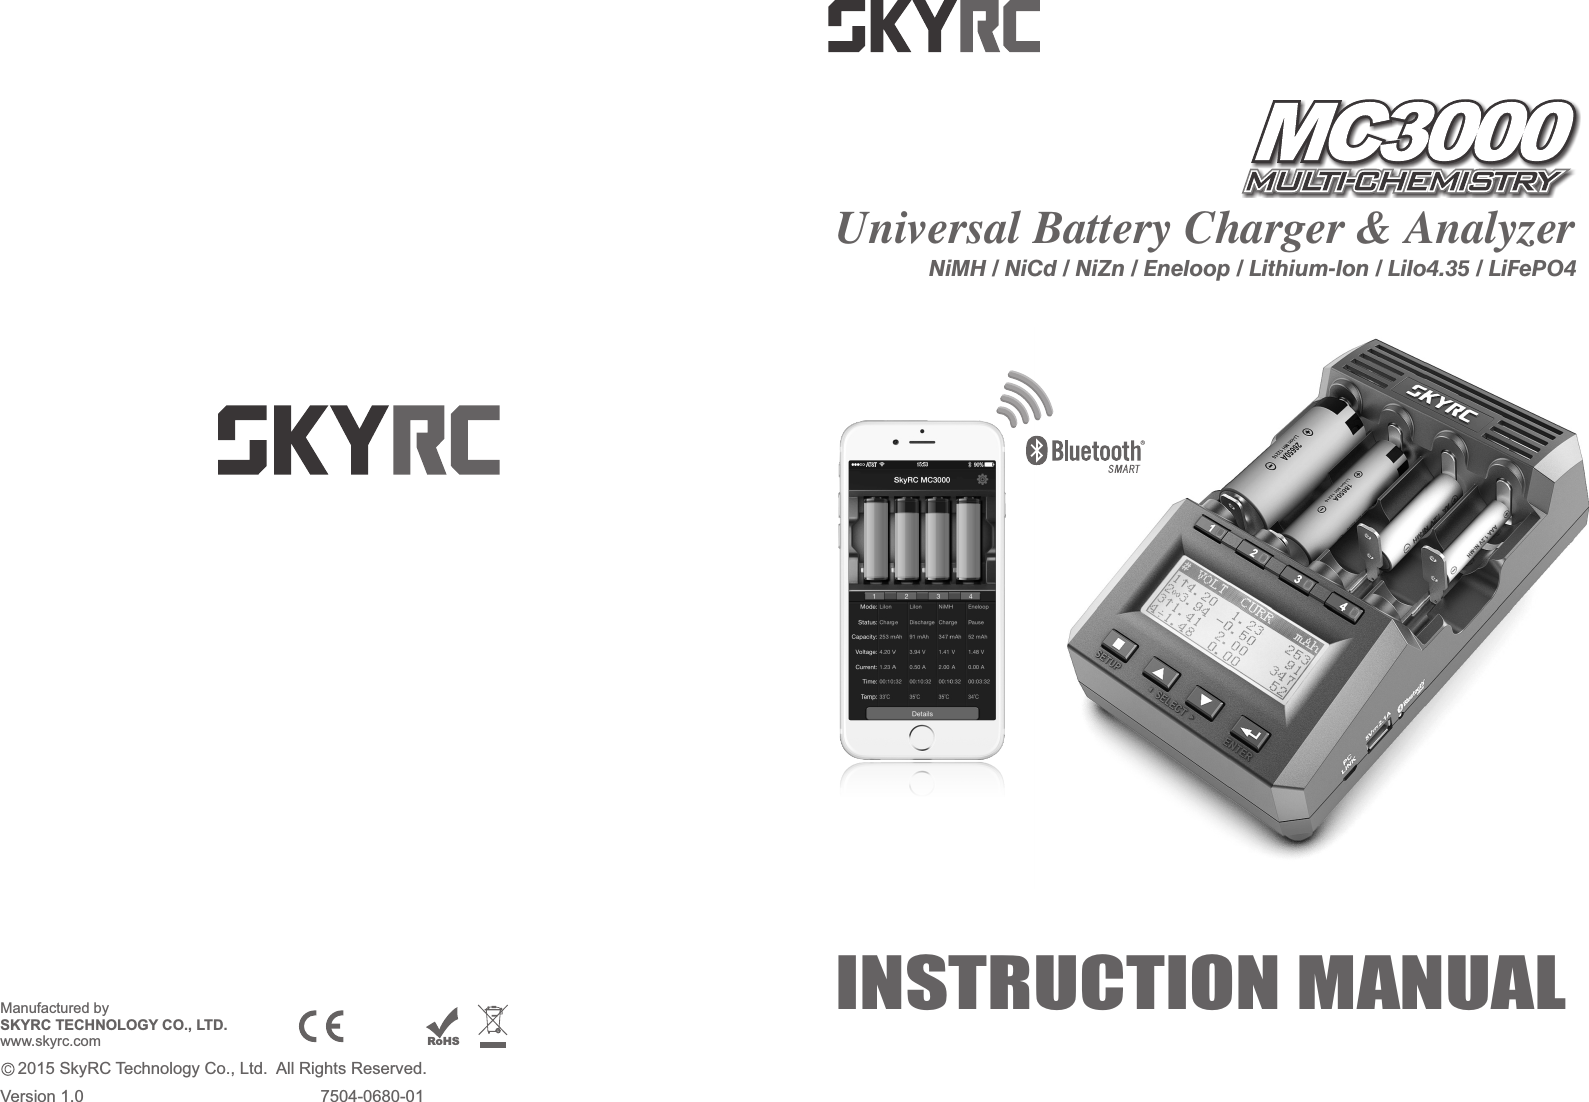 Page 1 of SKYRC Technology MC3000 Universal Battery Charger Analyzer User Manual